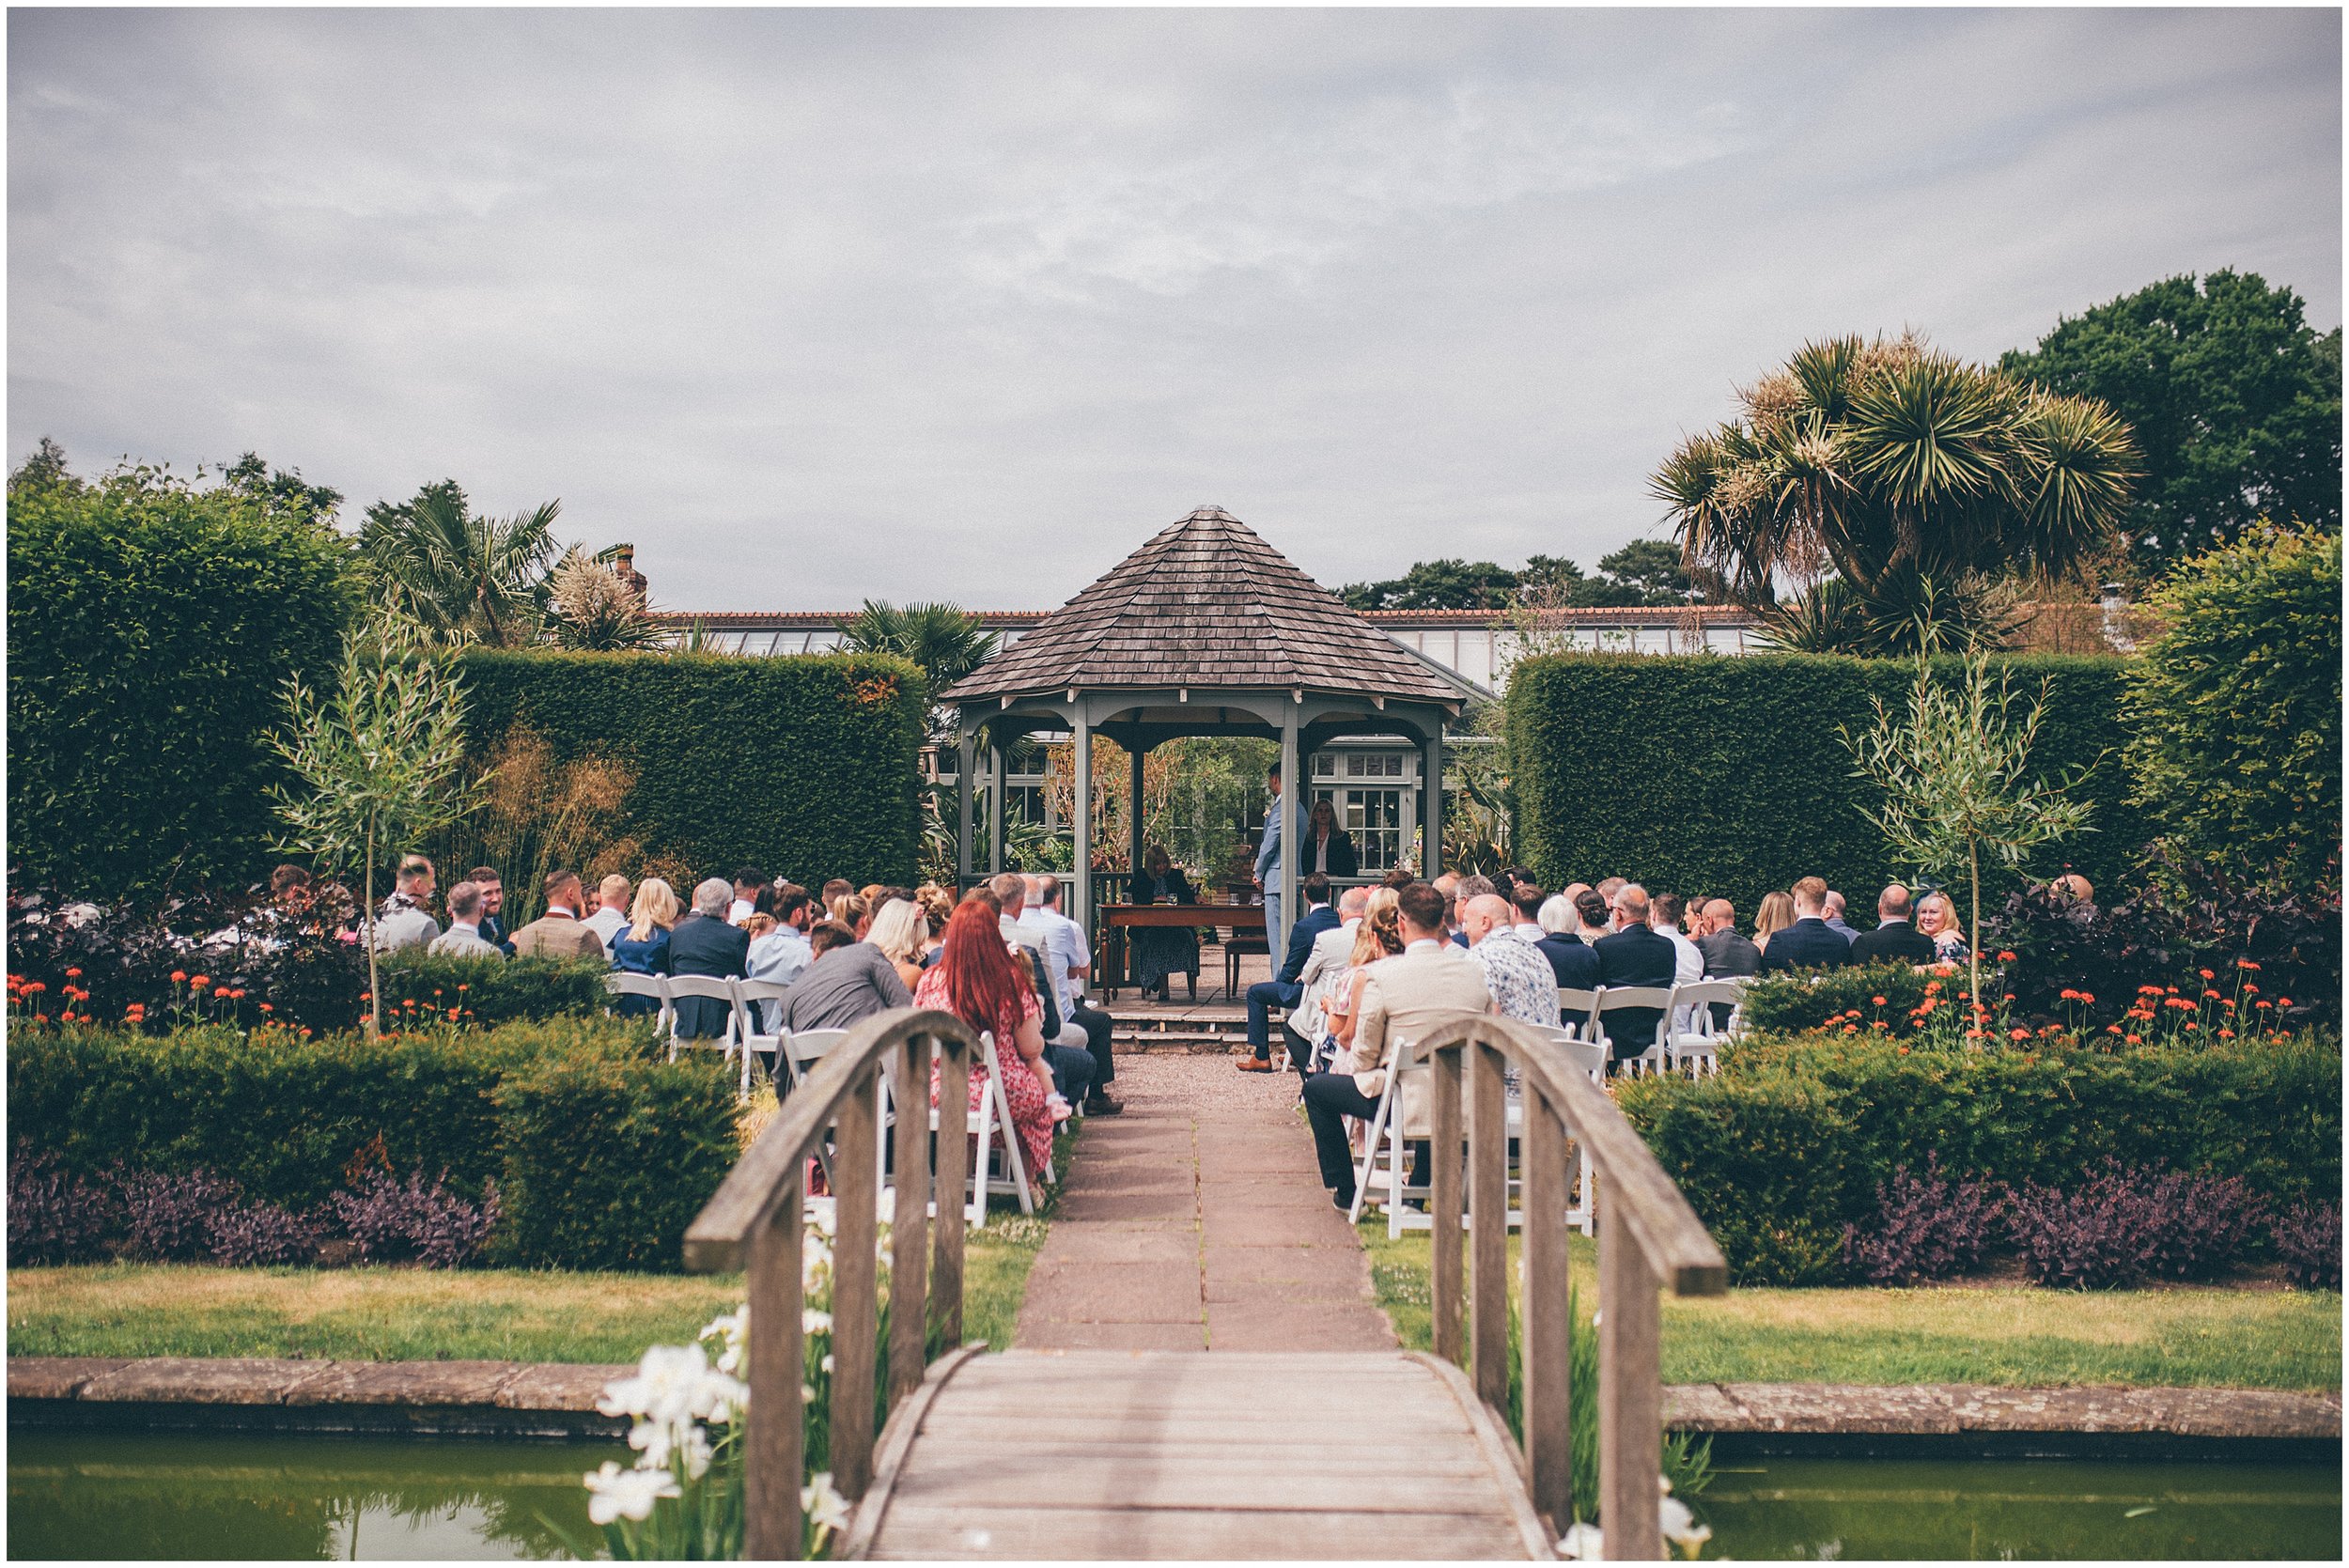 Outdoor wedding ceremony in the gardens at Abbeywood Estate in Delamere, Cheshire